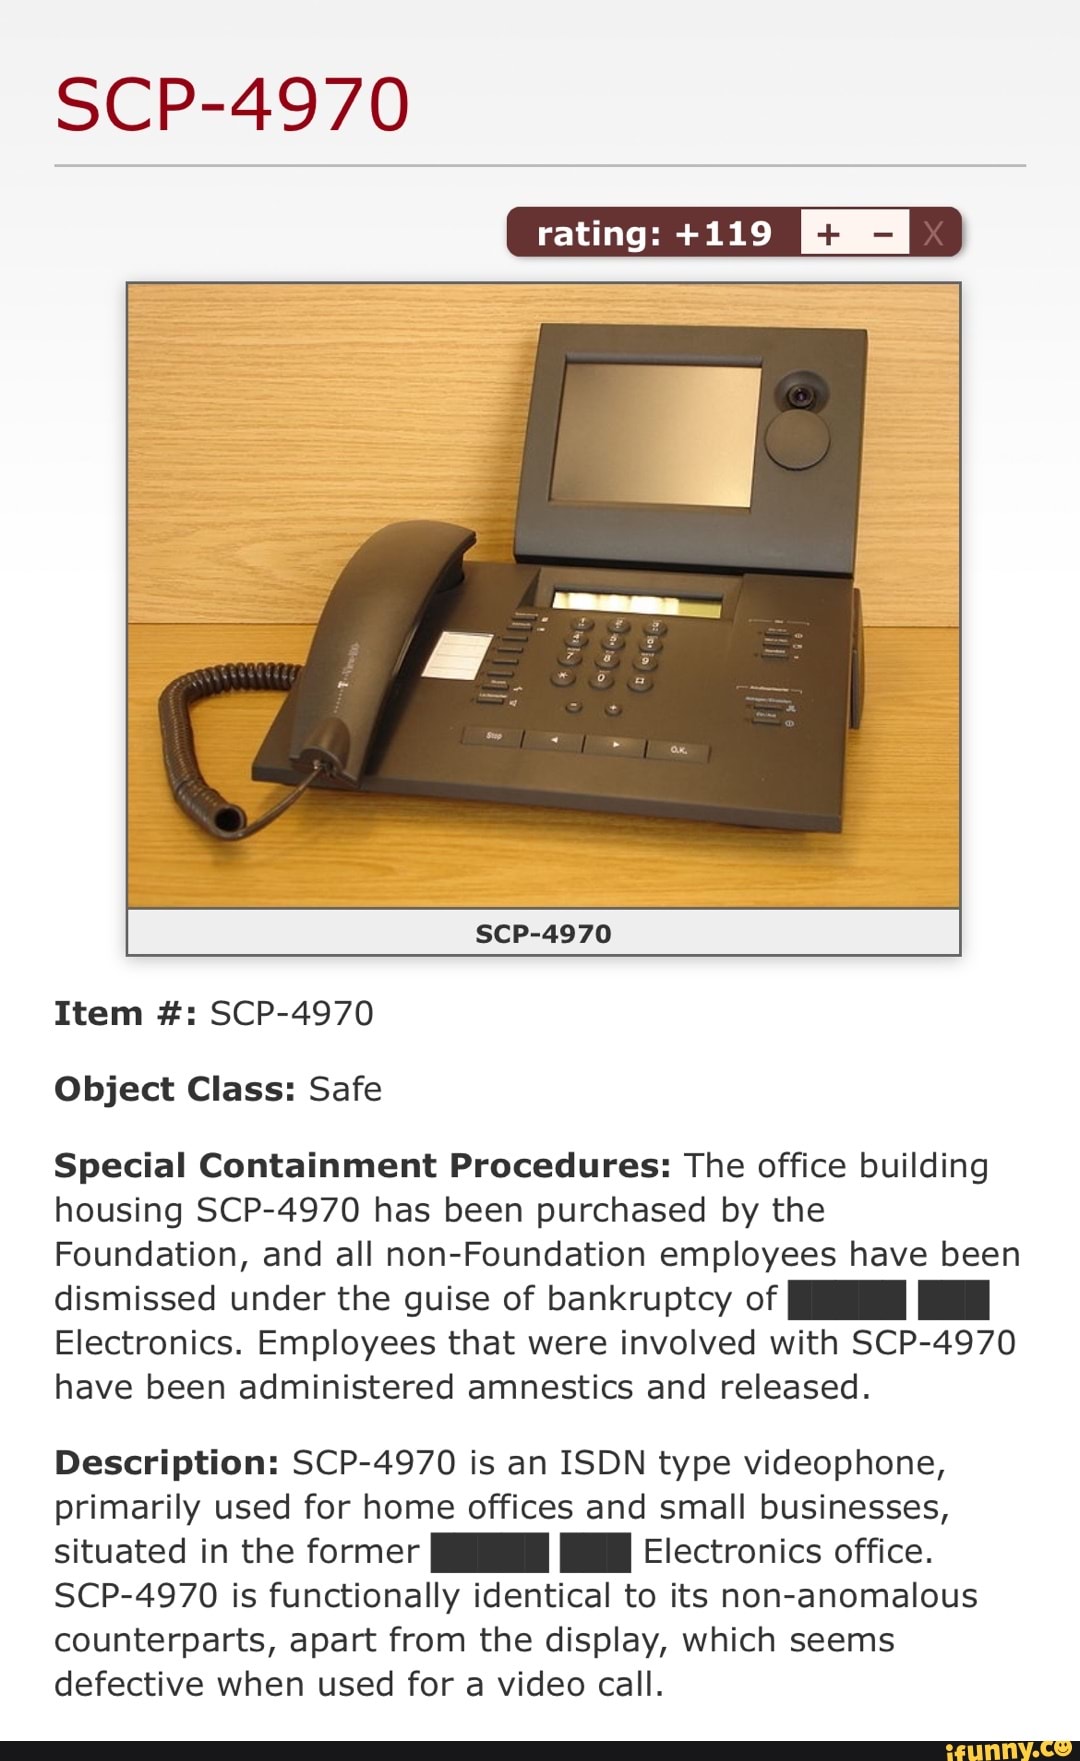 Replying to @kanakanae.k yes I shipped a computer SCP with a